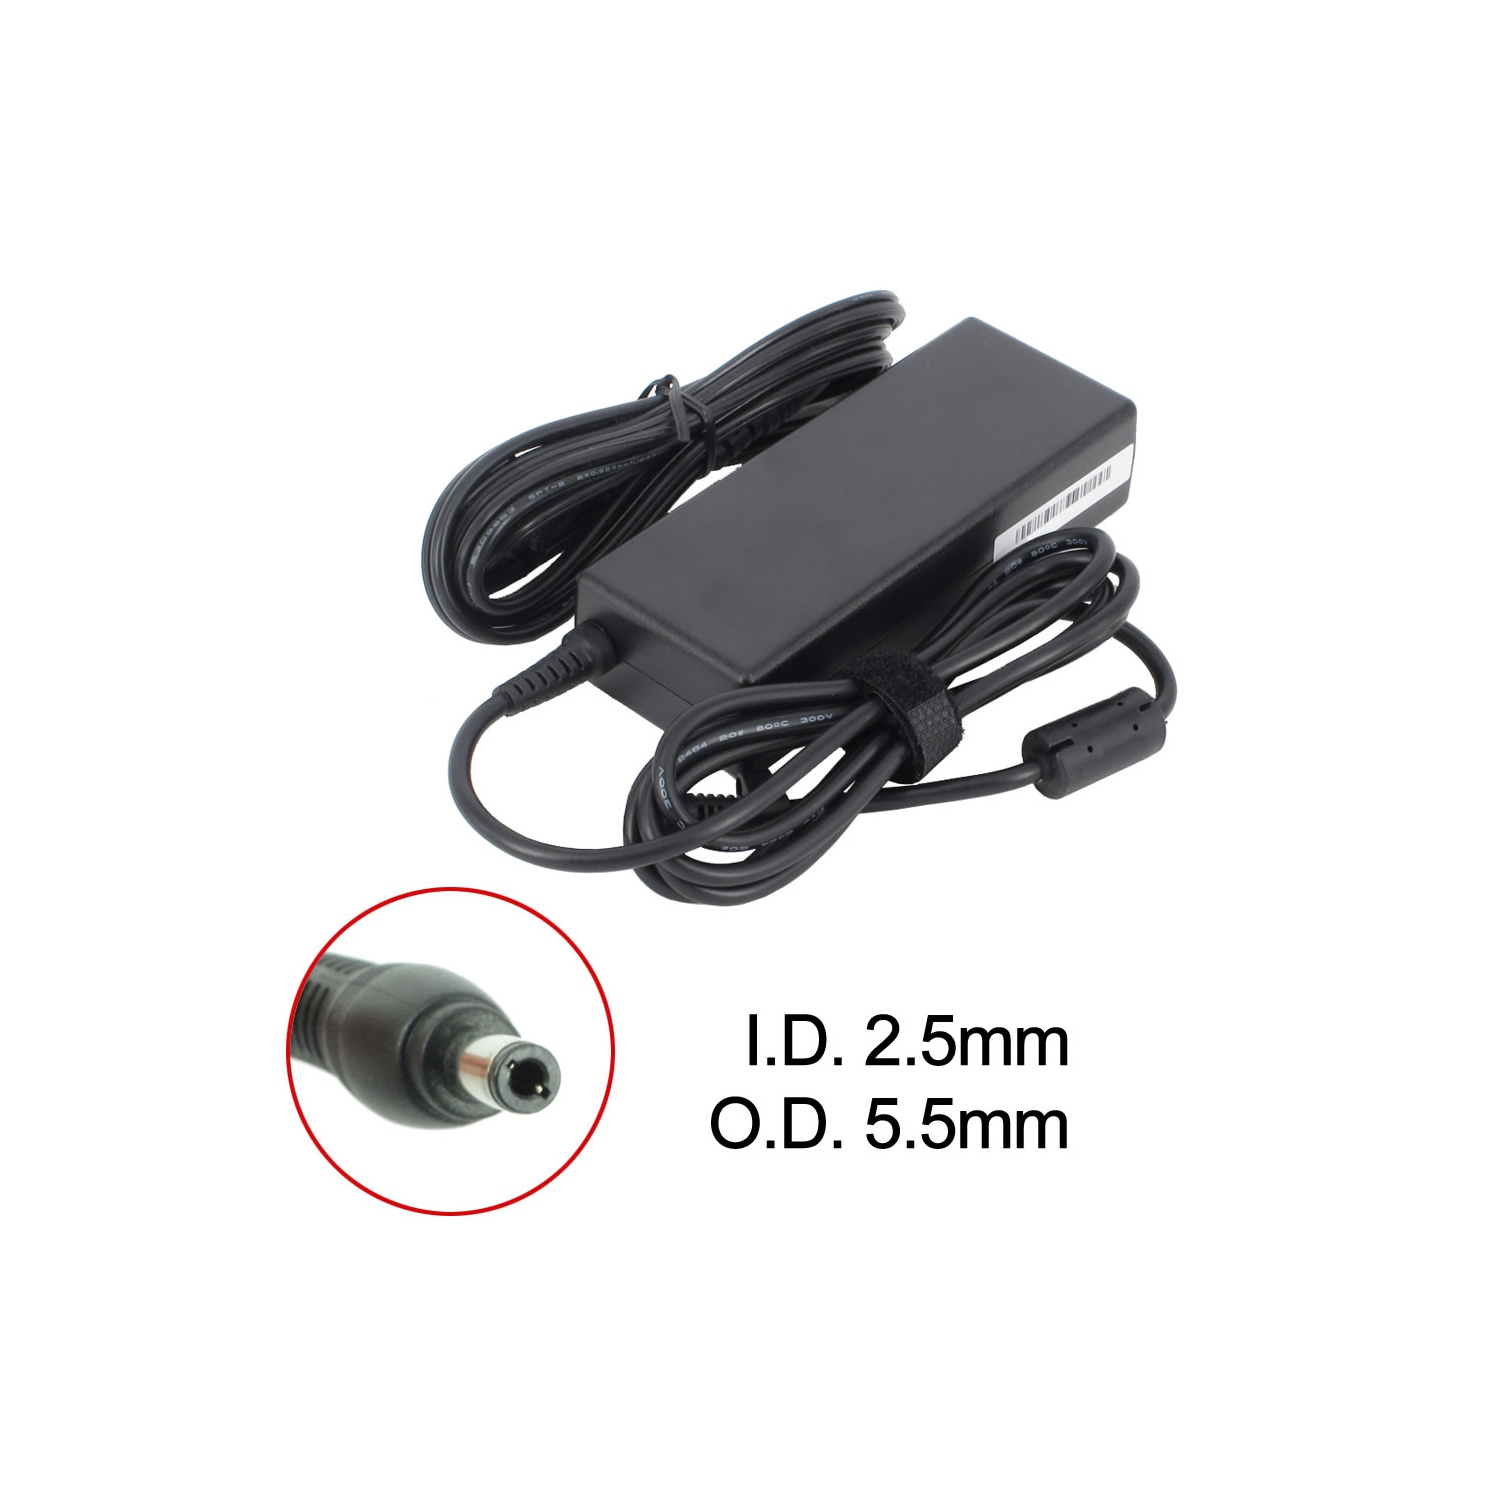 New Laptop AC Adapter for Acer Ferrari 4001, 0220A1990, 1528569, 90-N00PW5200T, ADP-65 HB BBCF, AZ121508, PA-1900-66